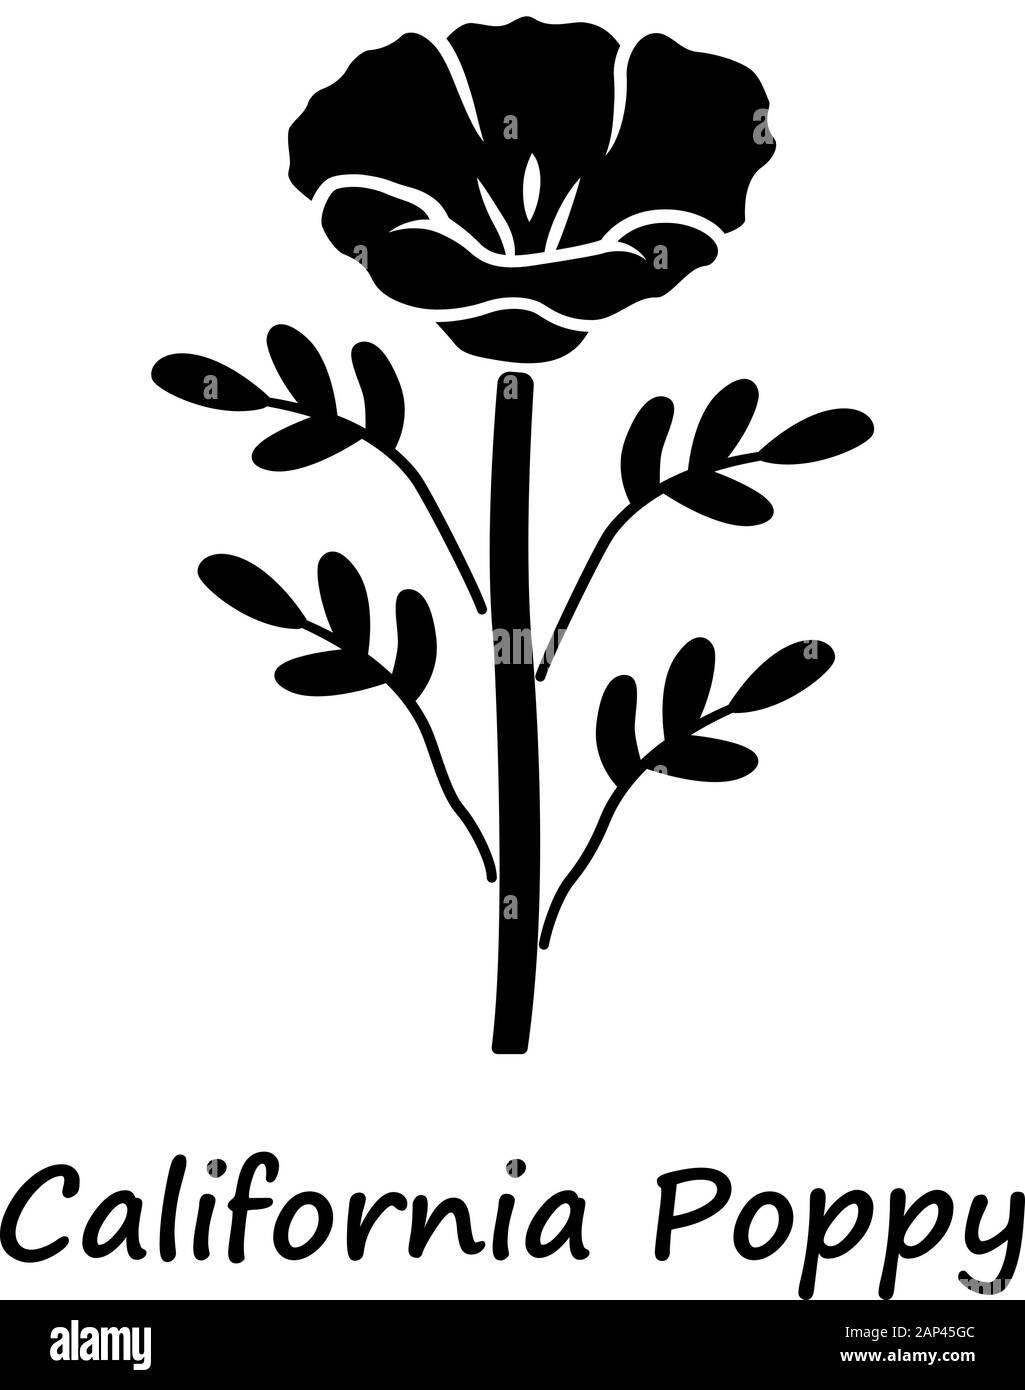 California poppy glyph icon. Papaver rhoeas with name inscription. Corn rose blooming wildflower. Herbaceous plants. Field common poppy. Silhouette sy Stock Vector